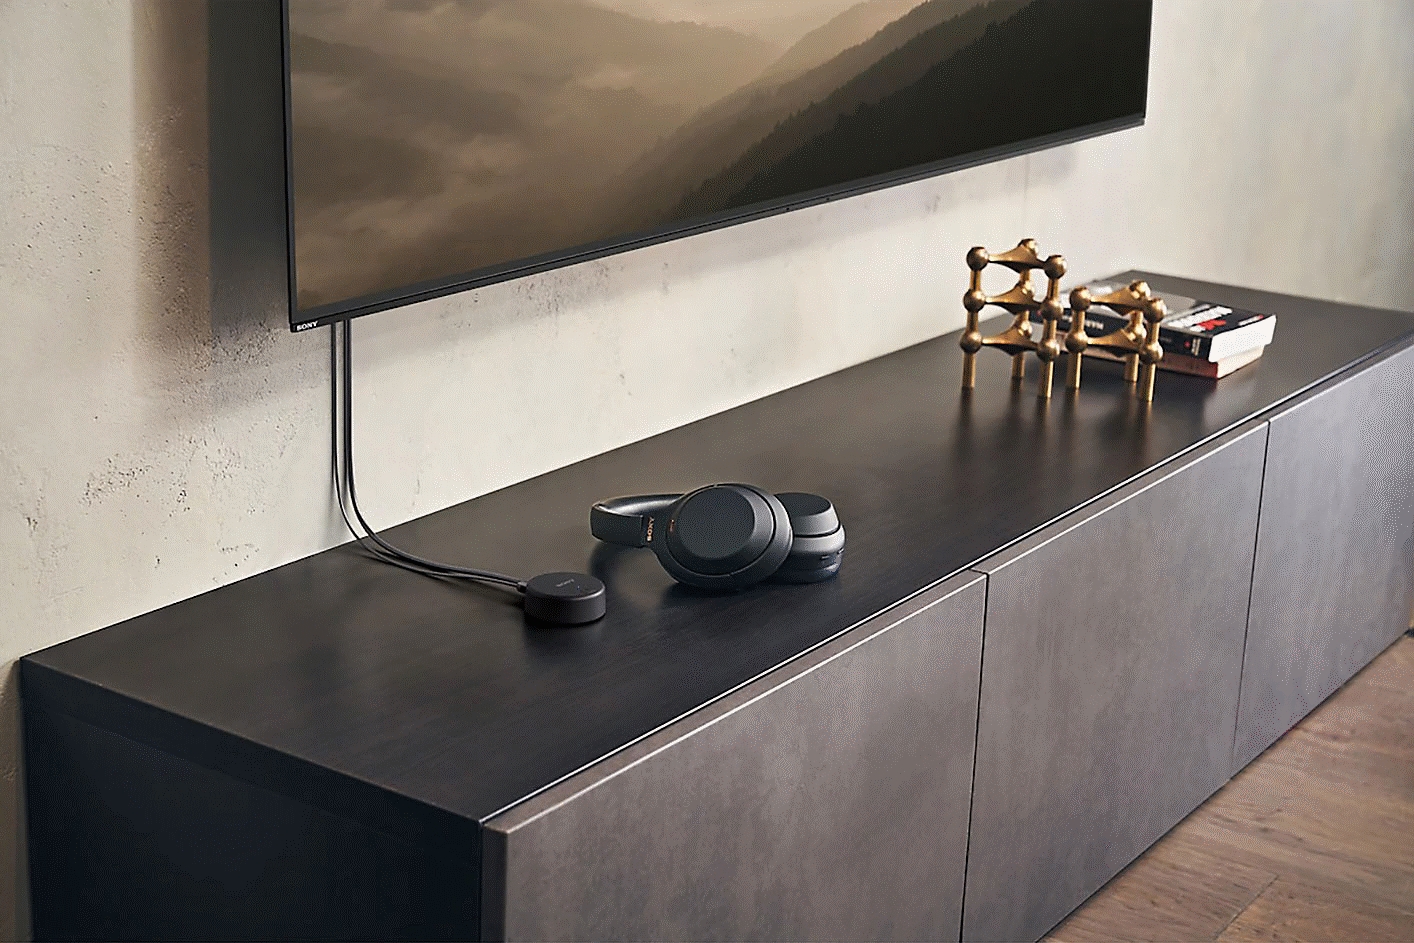 Image of a black pair of Sony WH-CH520 headphones sitting on a TV unit underneath a mounted TV